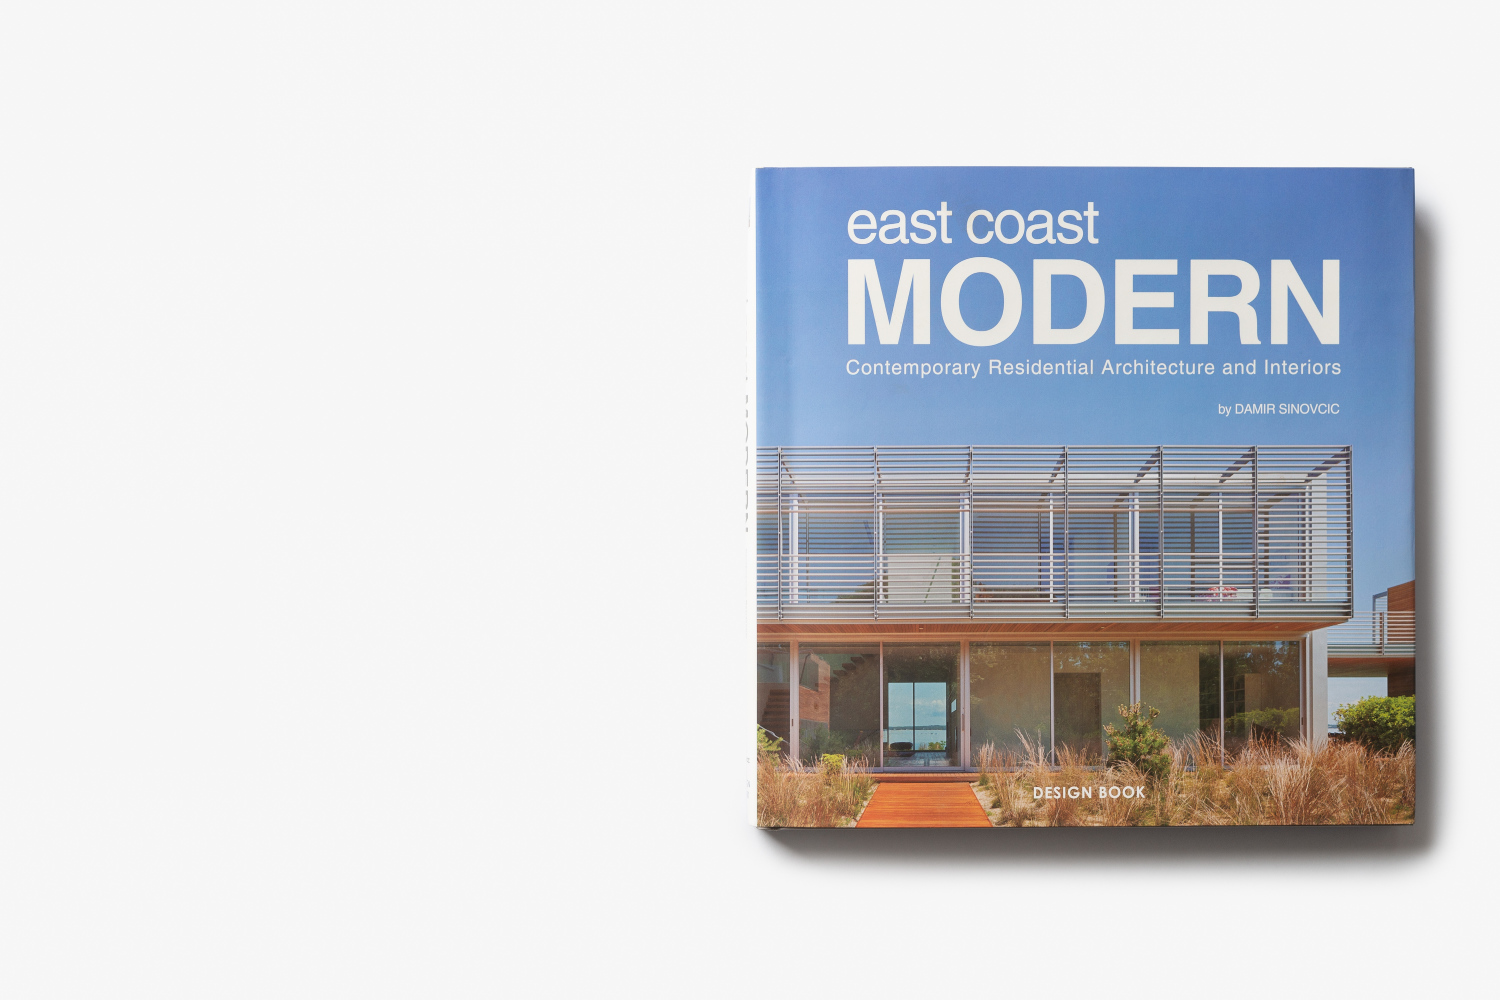 Birdseye Featured in “East Coast Modern – Contemporary Residential Architecture and Interiors”